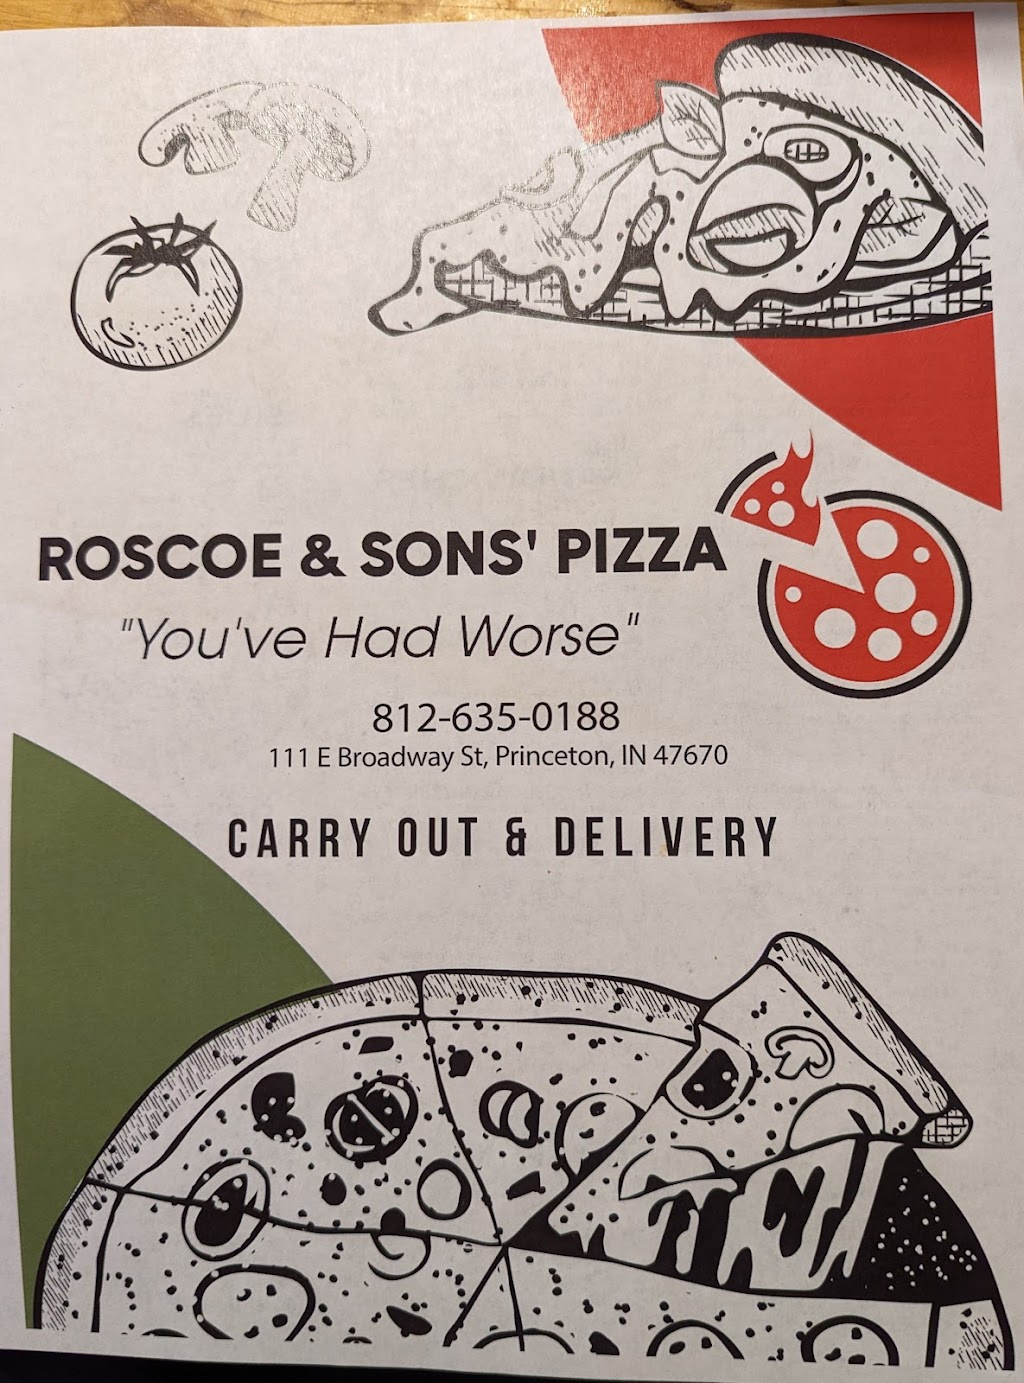 Roscoe & Sons Pizza | restaurant | 111 E Broadway St, Princeton, IN 47670, USA | 8126350188 OR +1 812-635-0188